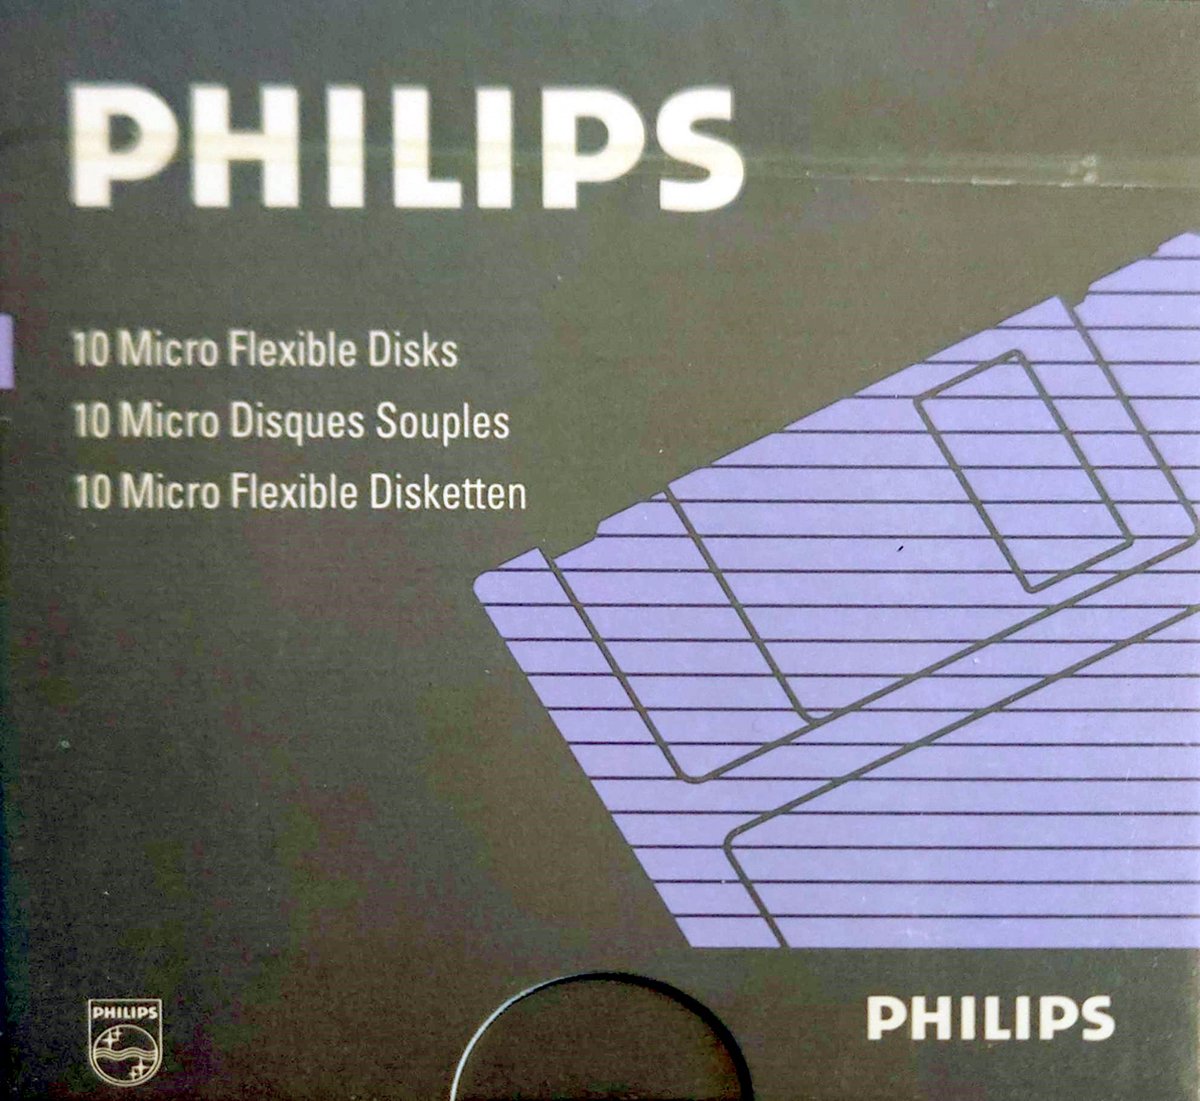 10 x Philips Micro Flexible Disks (Diskettes)